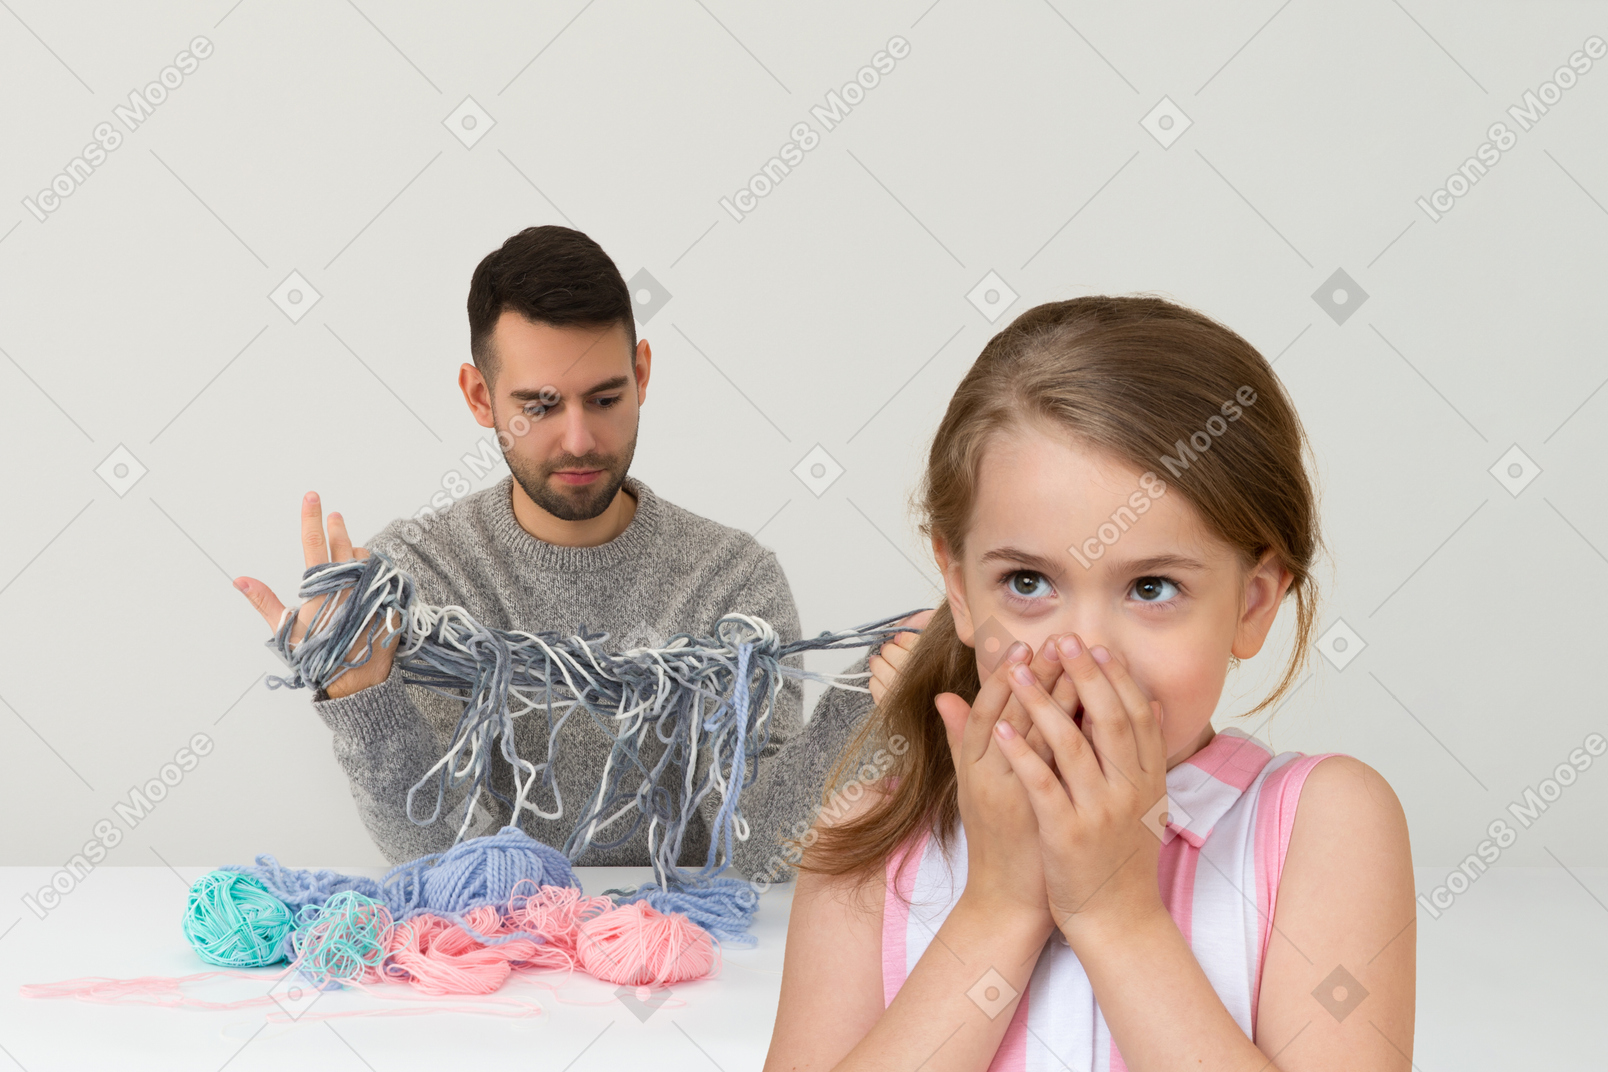 Confused little girl against her father who's looking at tangled mess of yarn